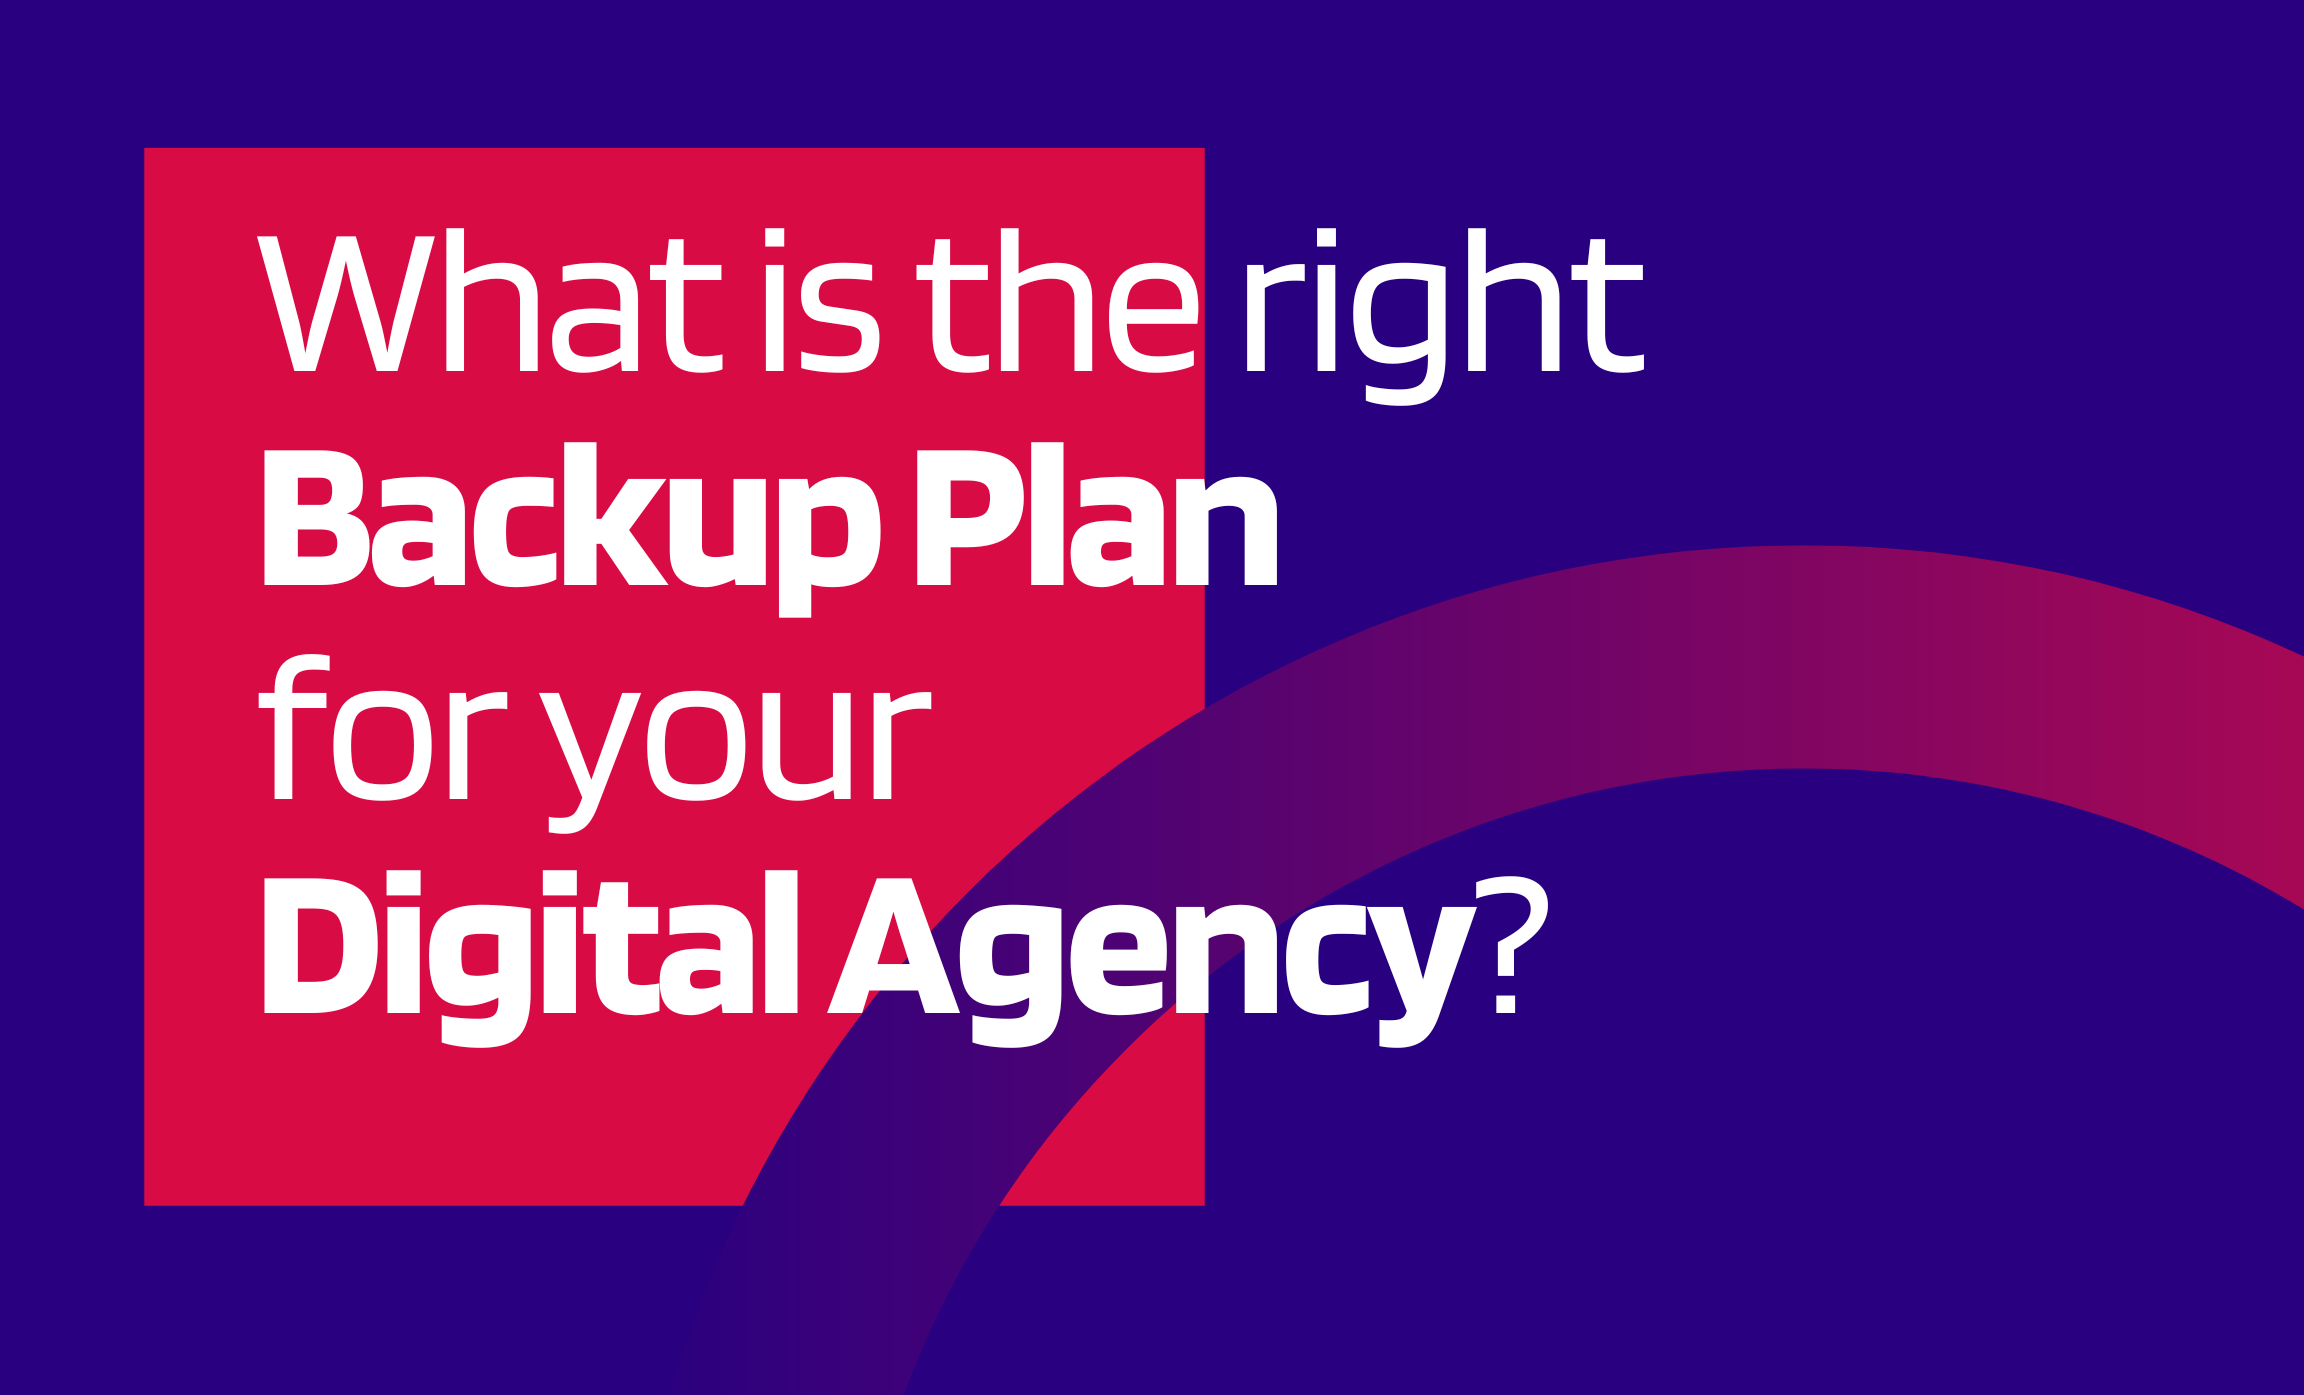 What Is The Right Backup Plan for Your Digital Agency?